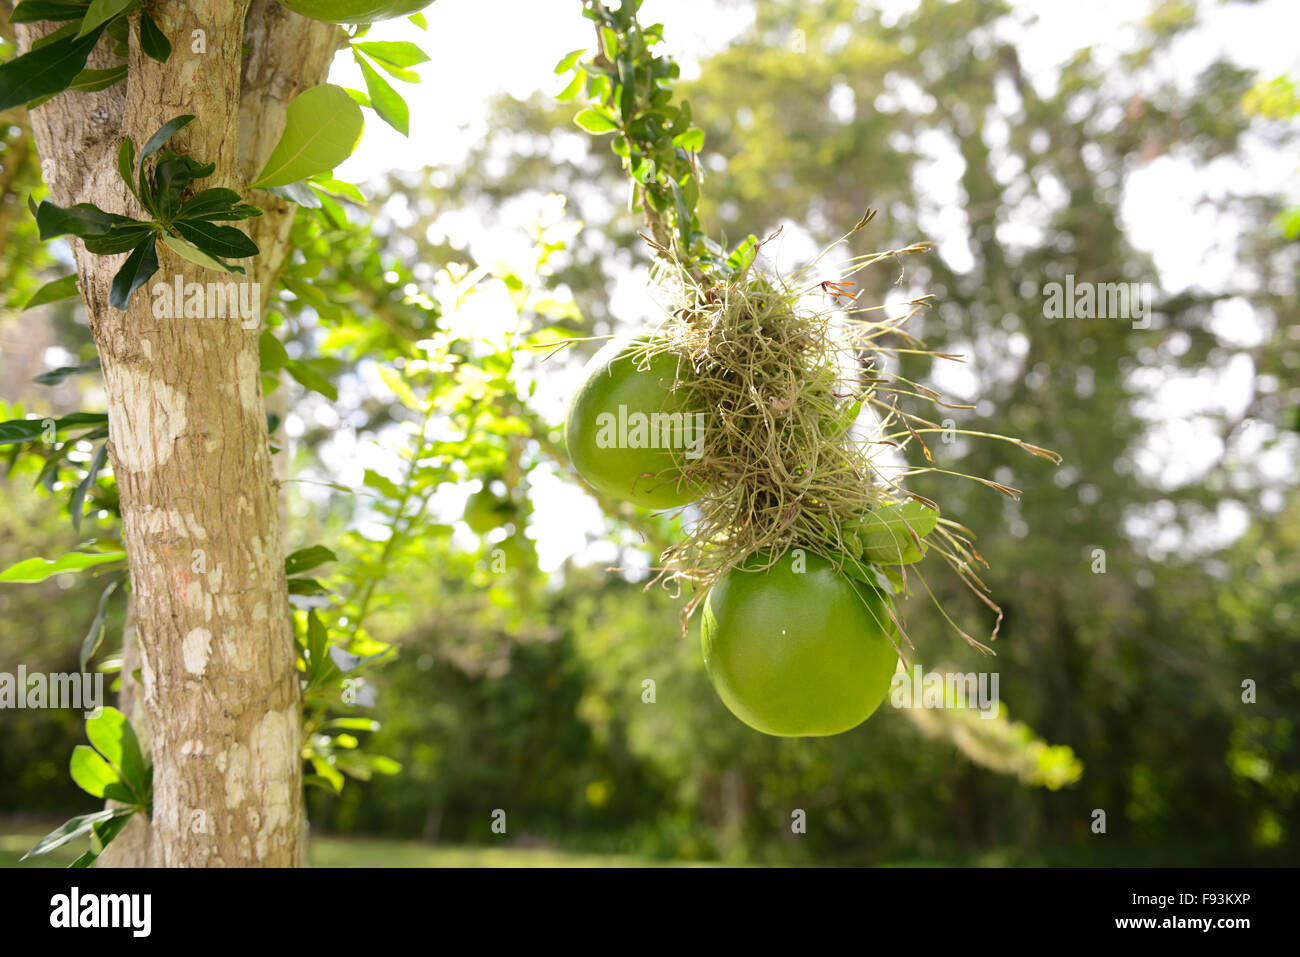 Branches of a calabash tree with some fruit hanging from it at the Tibes Indigenous Ceremonial Center. Ponce, Puerto Rico. Stock Photo